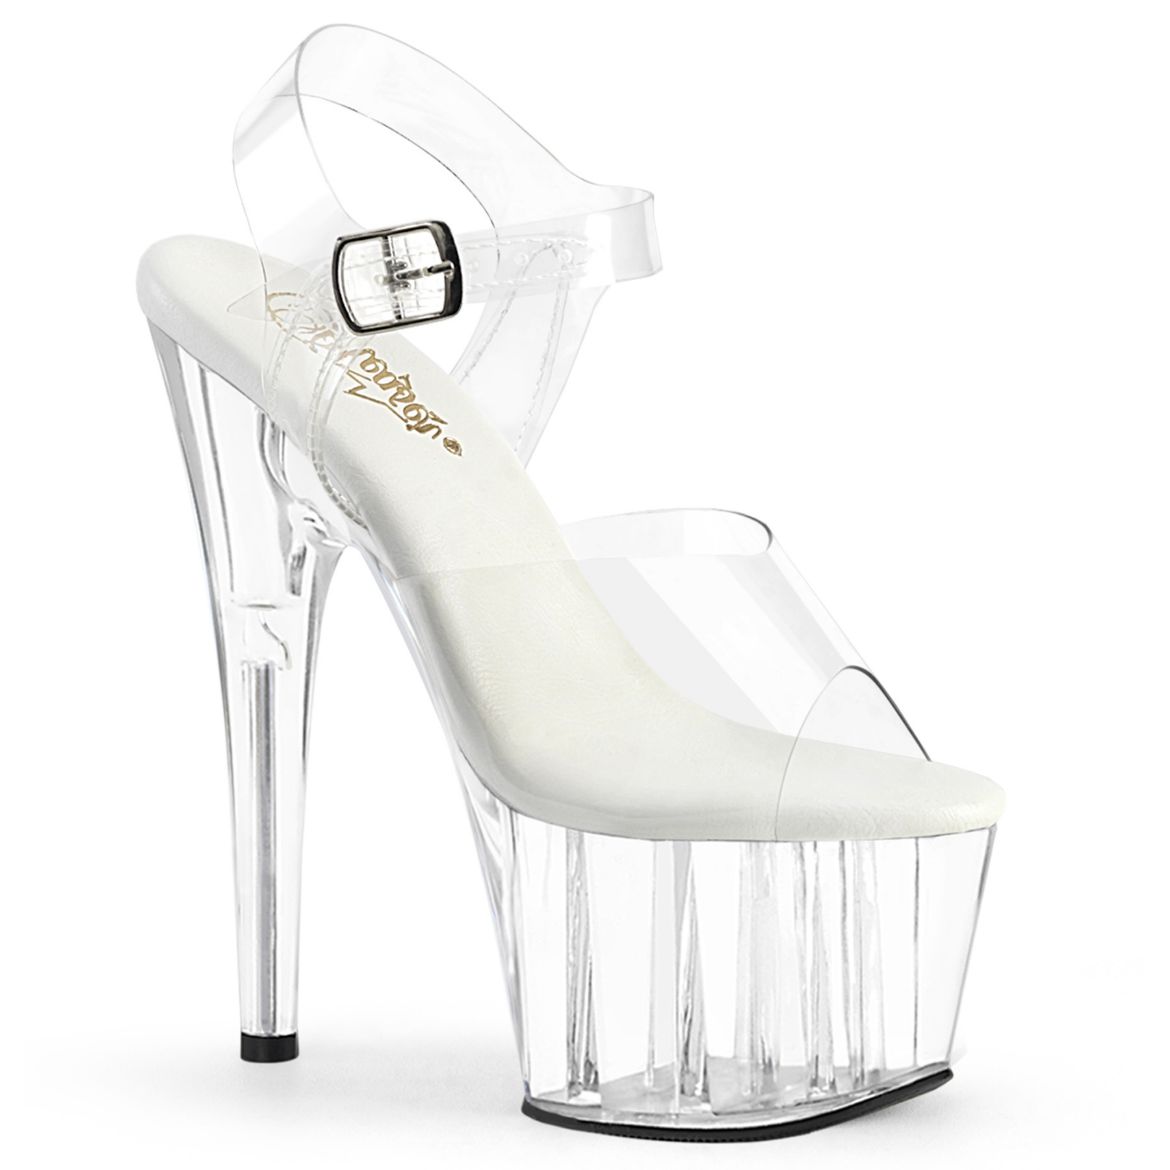 Product image of Pleaser ADORE-708VL Clr/Clr 7 Inch Heel 2 3/4 Inch PF Faux Leather Insoles Ankle Strap Sandal